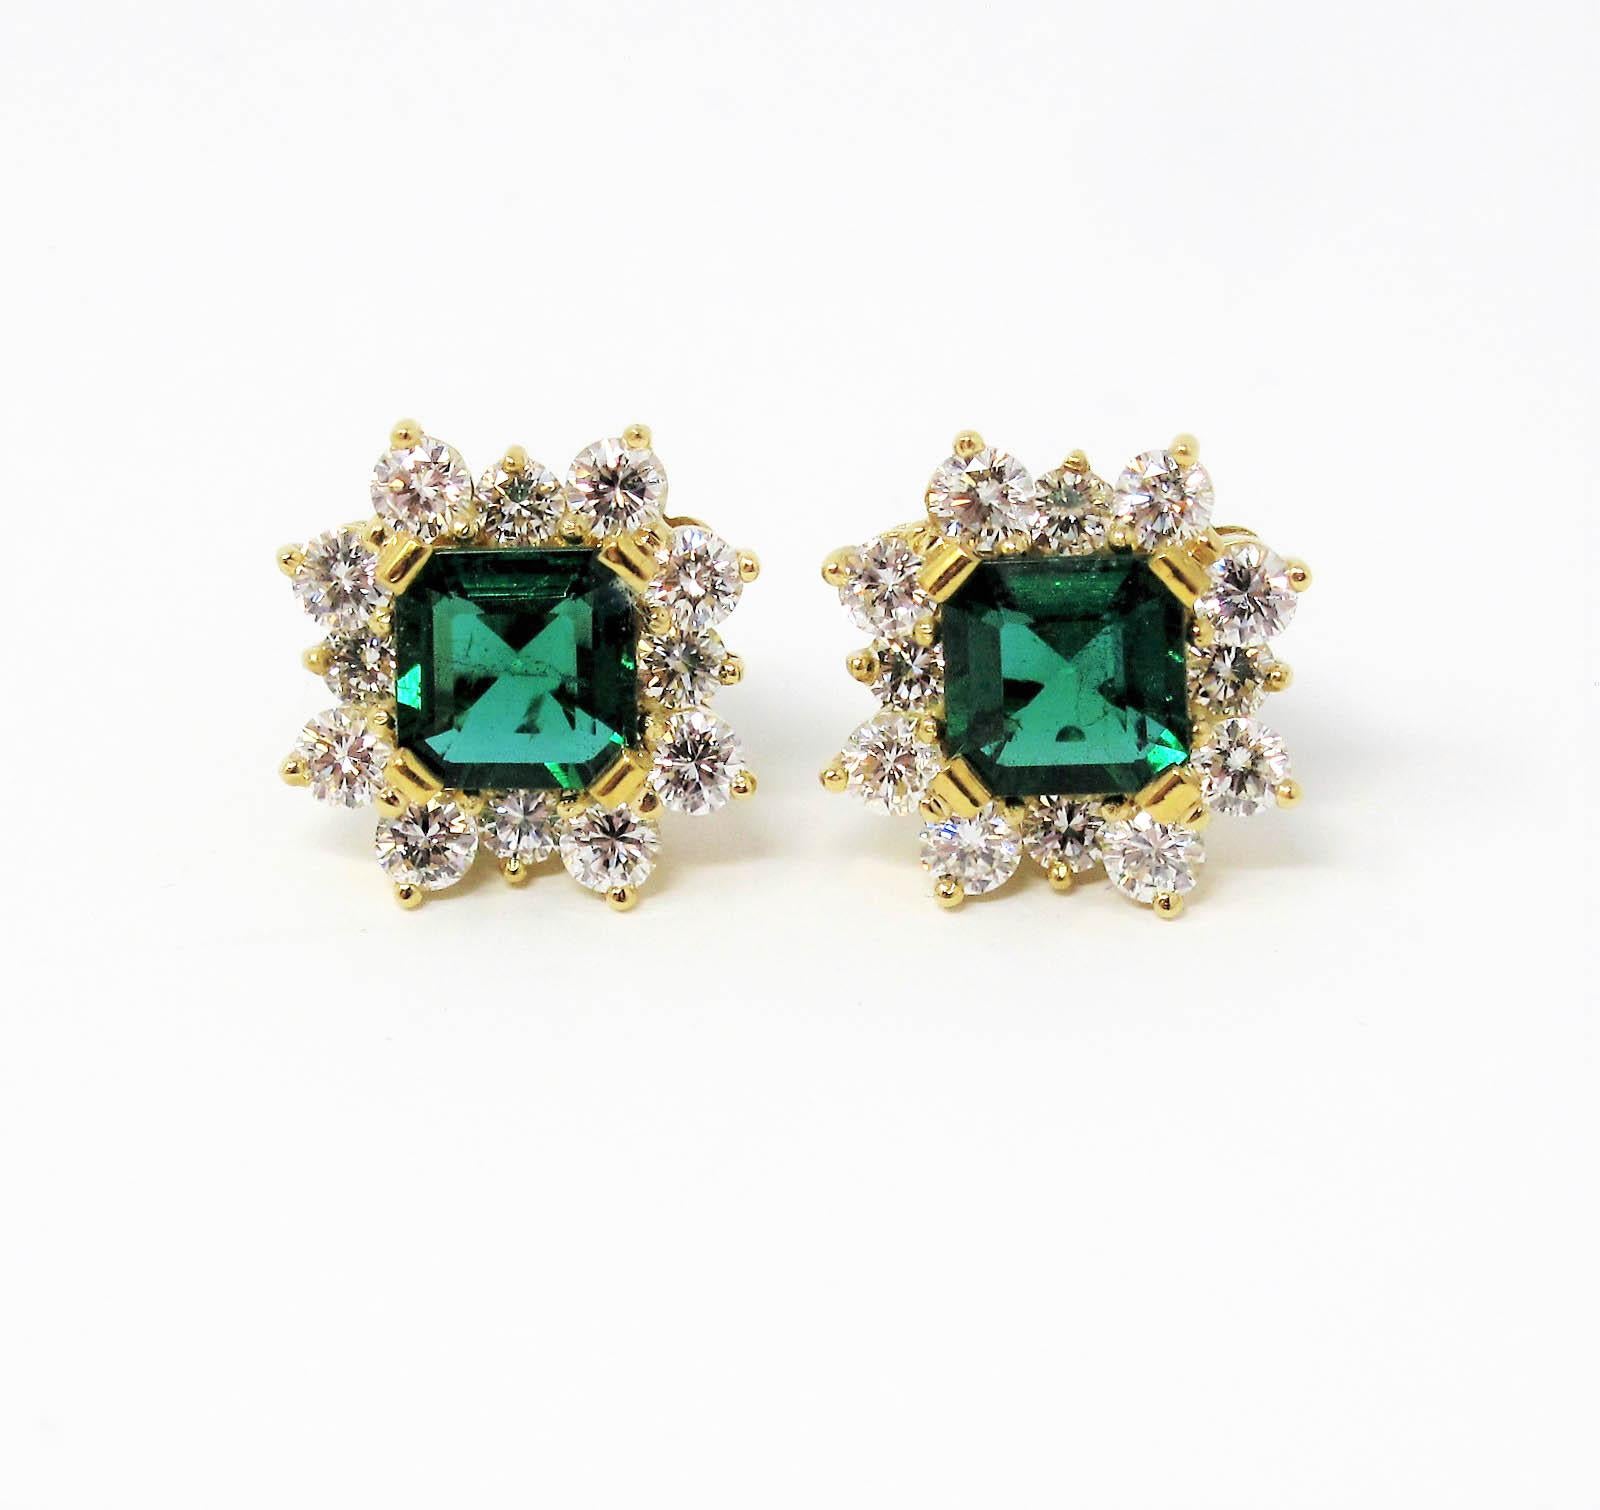 Absolutely incredible vintage-inspired emerald and diamond halo stud earrings. These eye-catching earrings give off major Old Hollywood glamour vibes with their striking green color and exquisite detail. The semi-rounded diamond halo gently softens